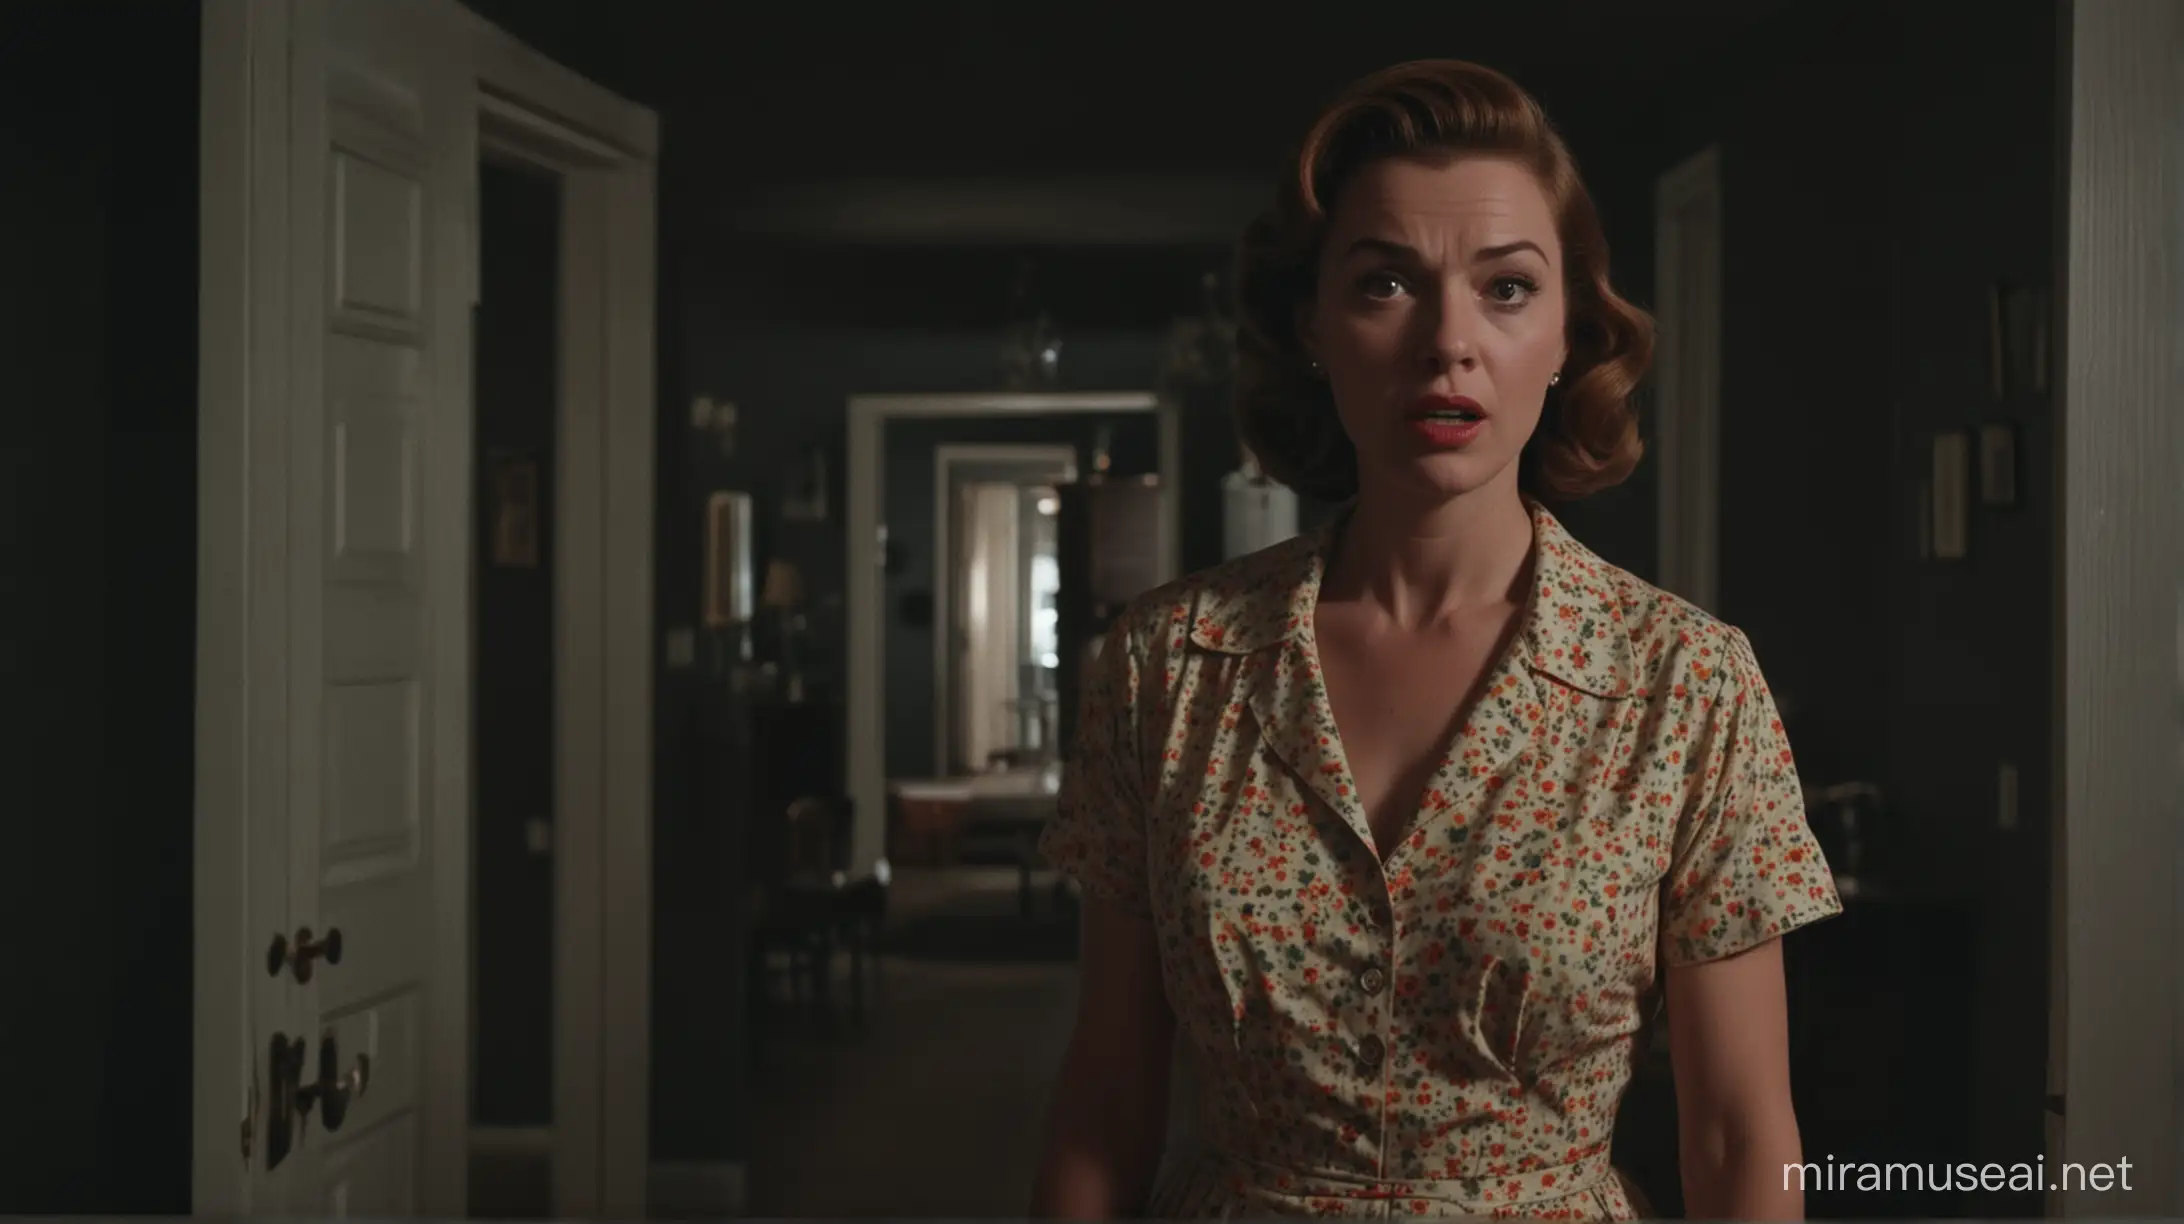 A 1950s housewife hunts people in a dark house